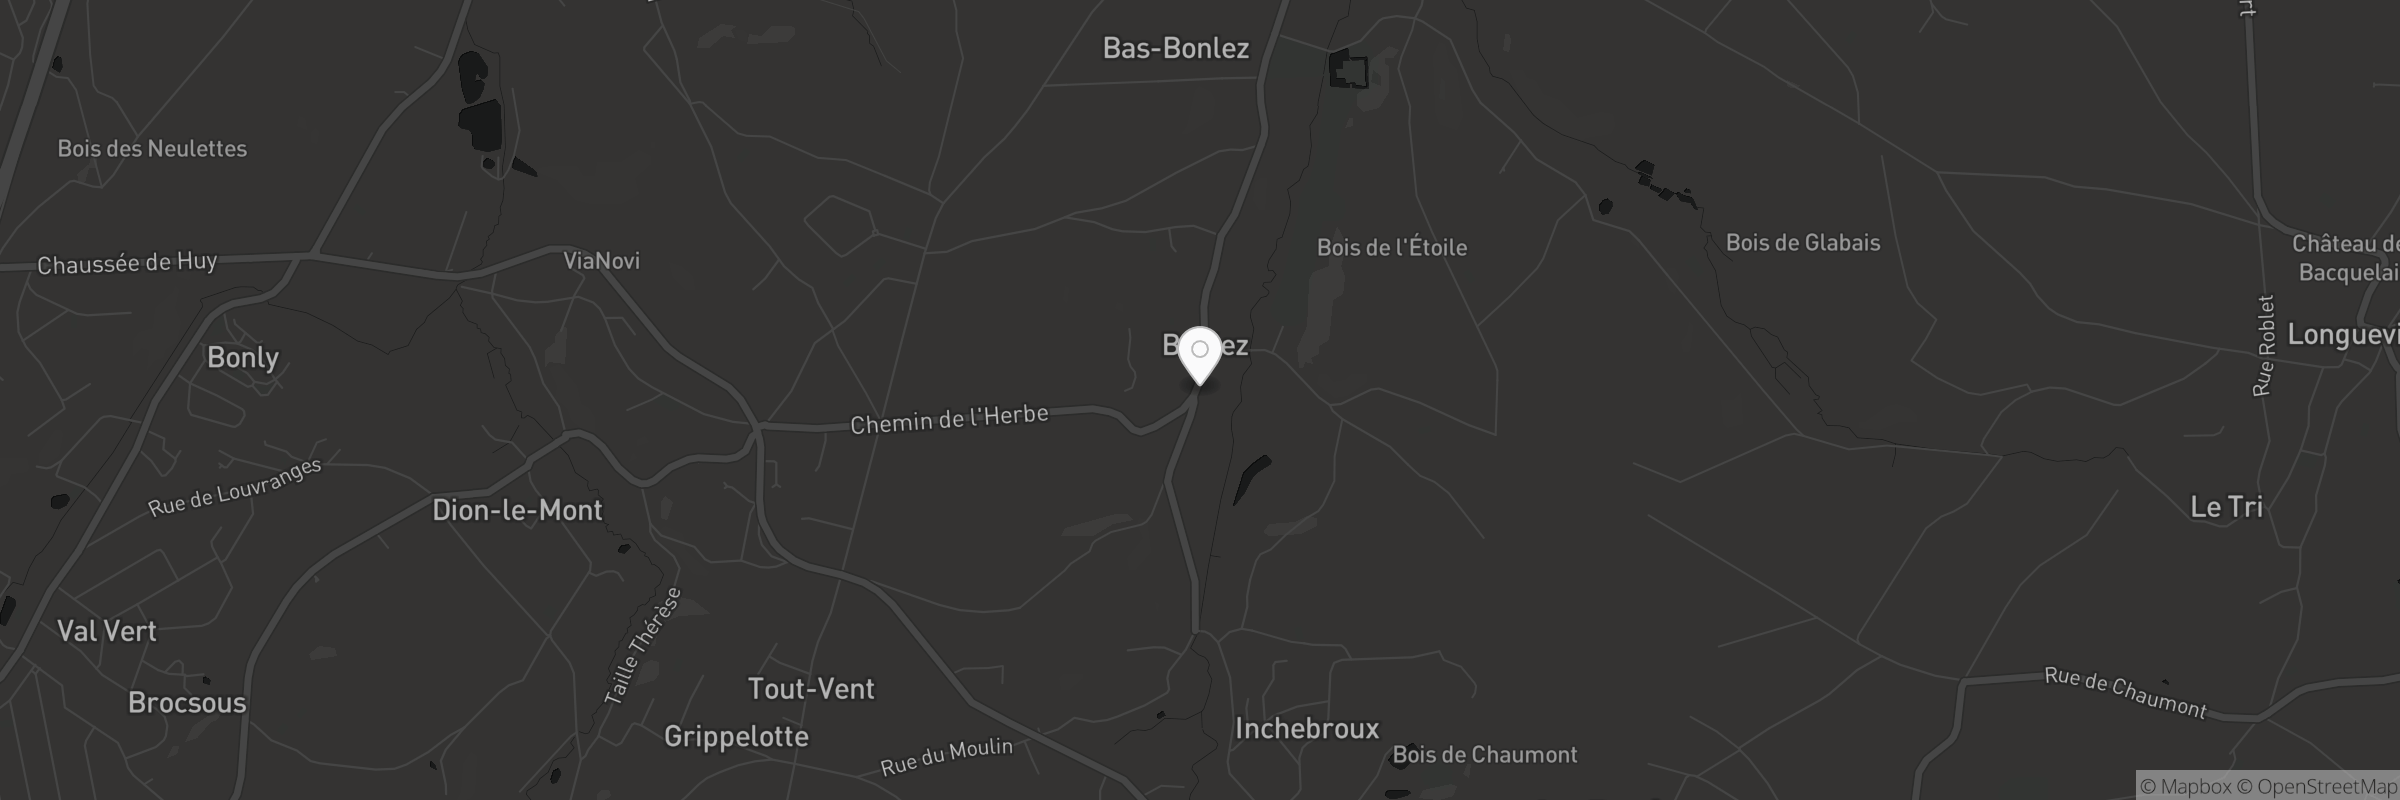 Map showing the address of Chemin de l'herbe